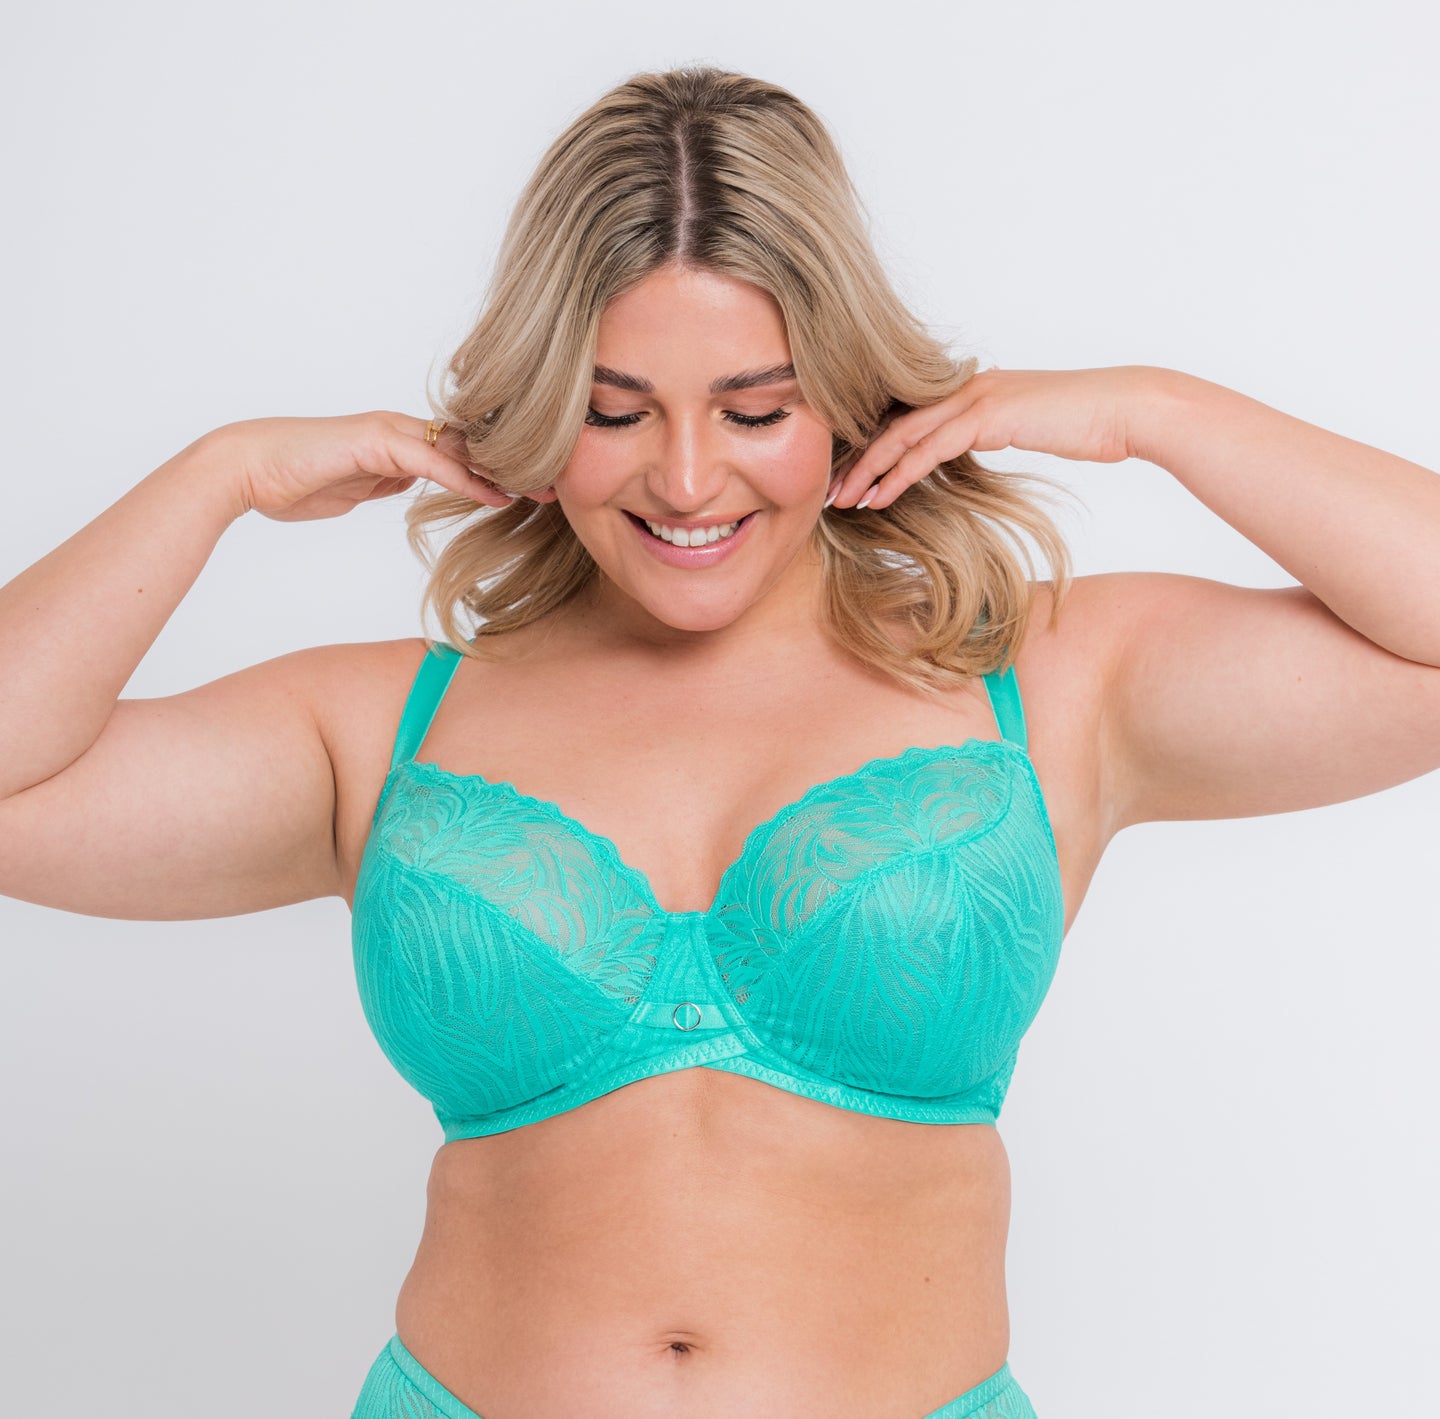 a woman with blonde hair is wearing a lagoon blue colored lacy bra